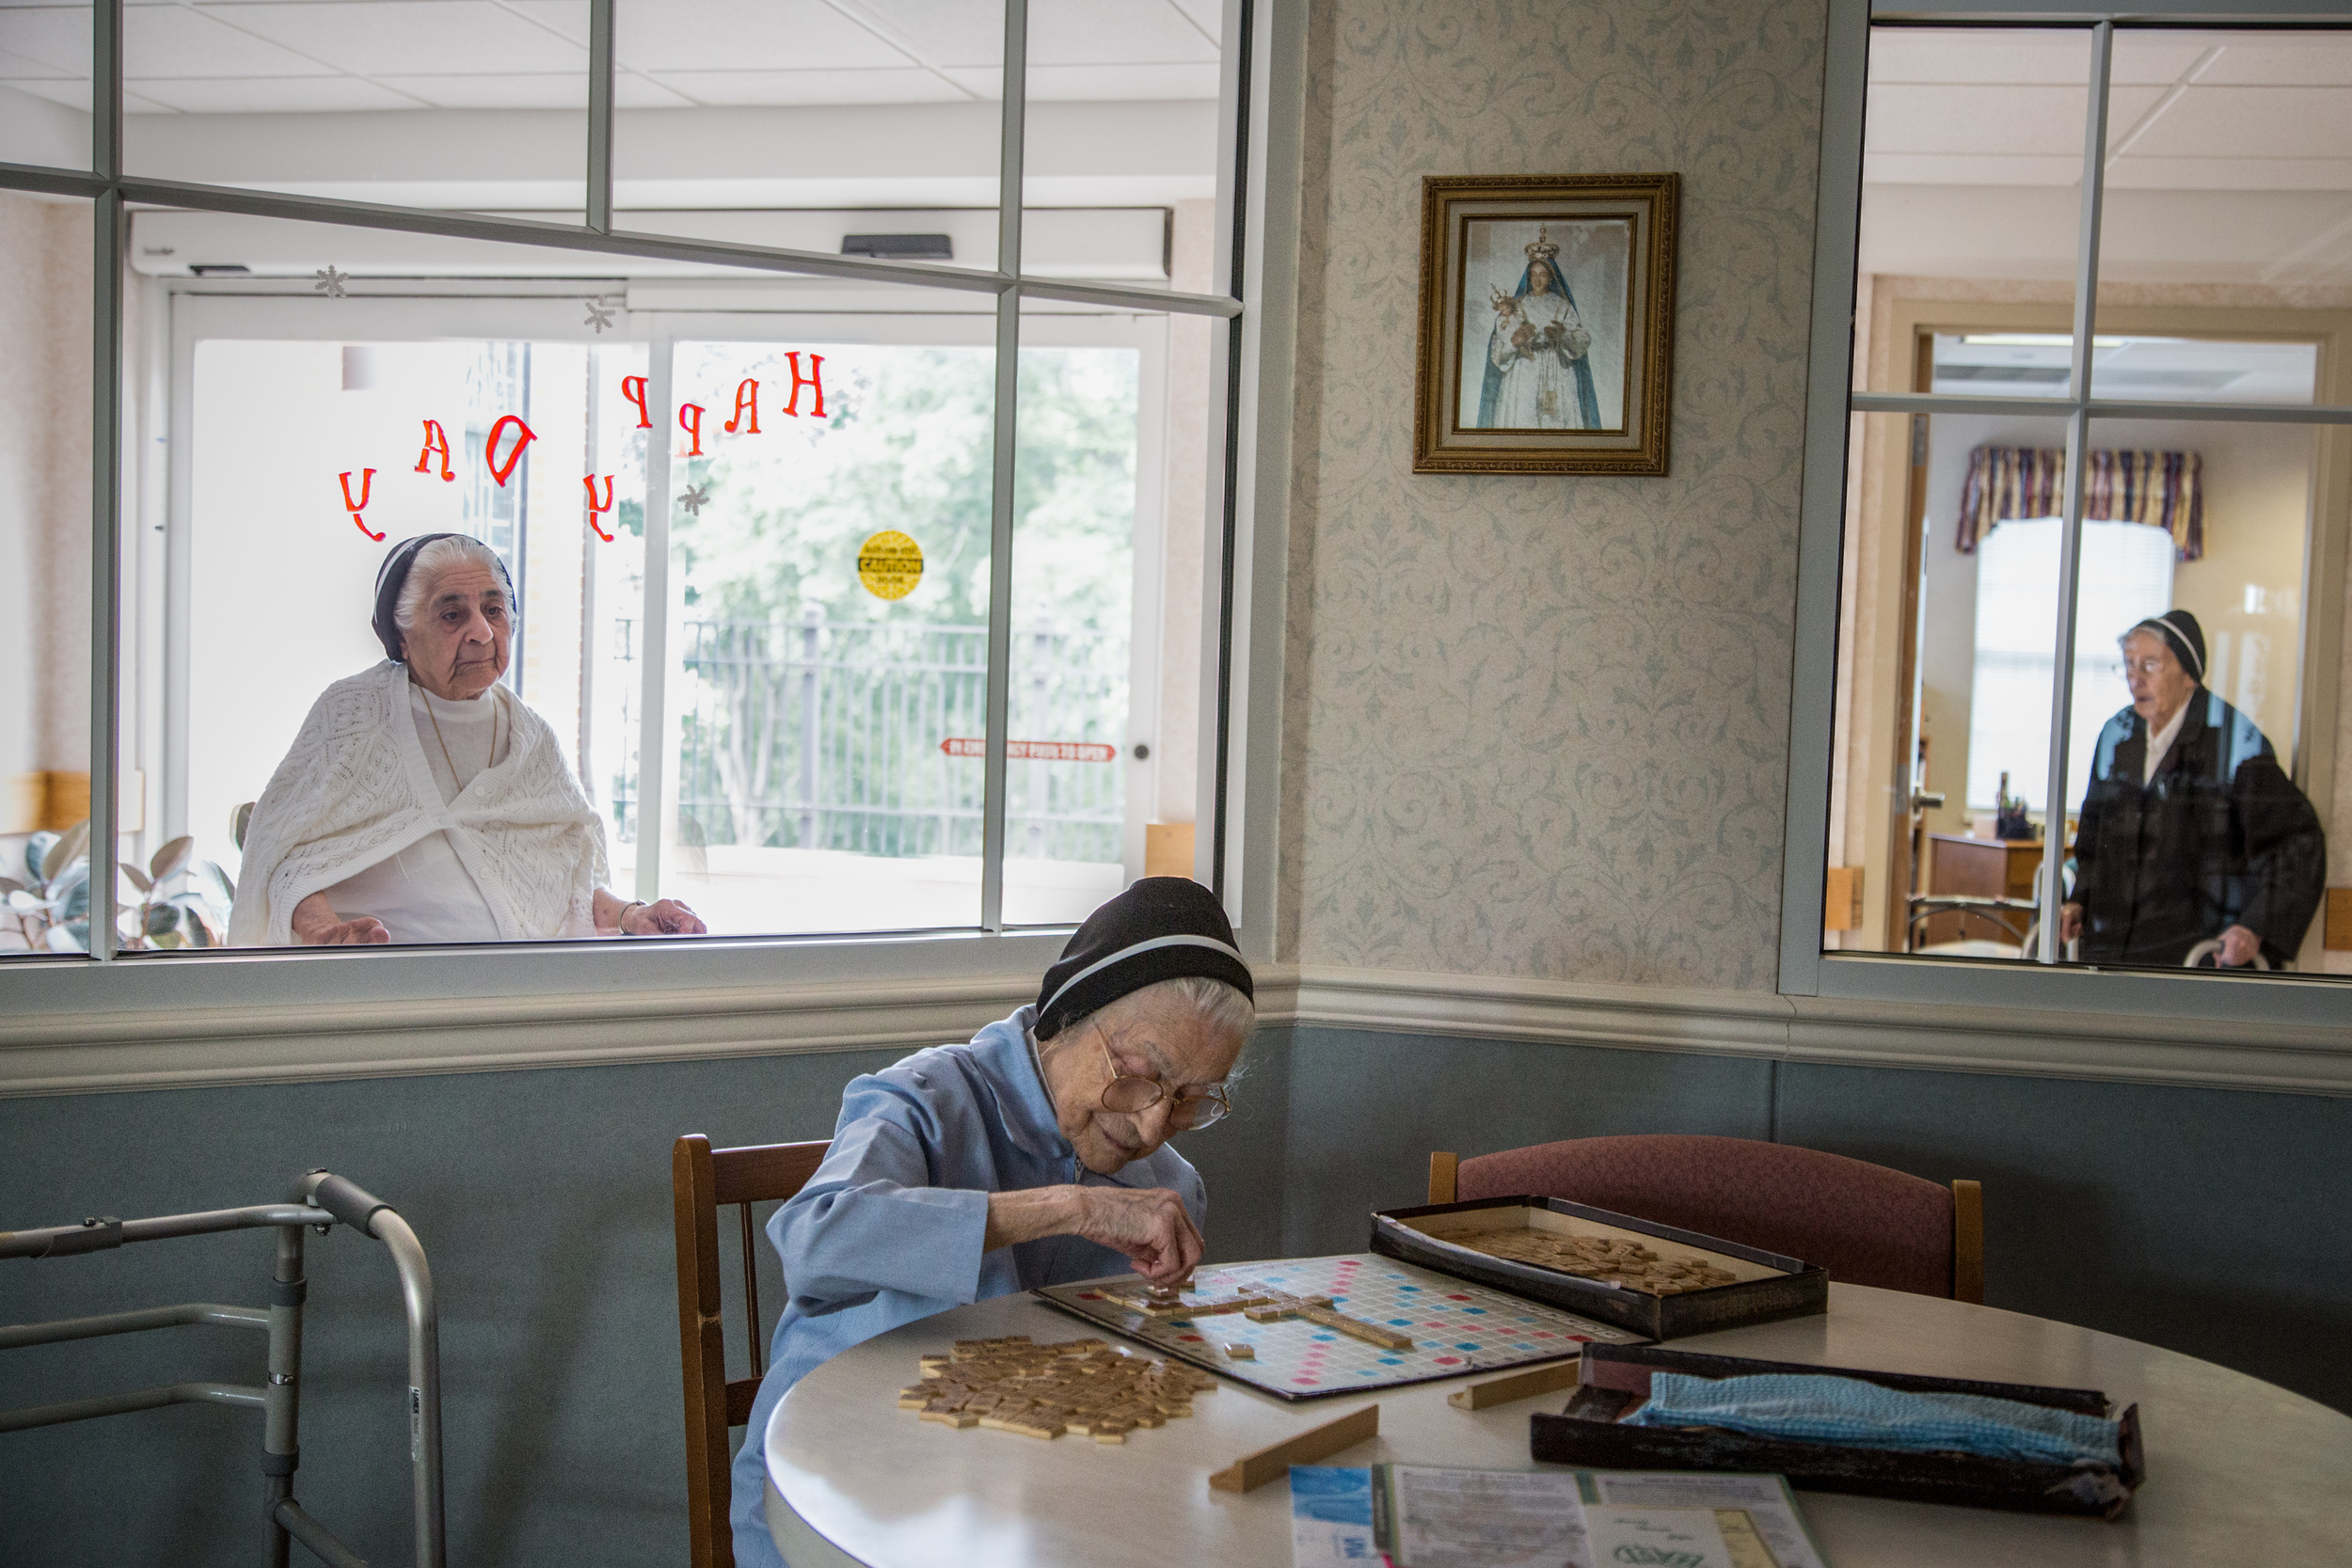  At 100 years of age, Sr. Mary Testa enjoys playing Scrabble every day in the Infirmary’s Community Room. The scattered tiles spell words related to teaching such as: schools, teachers, pupils, books, girls, boys, and years. 